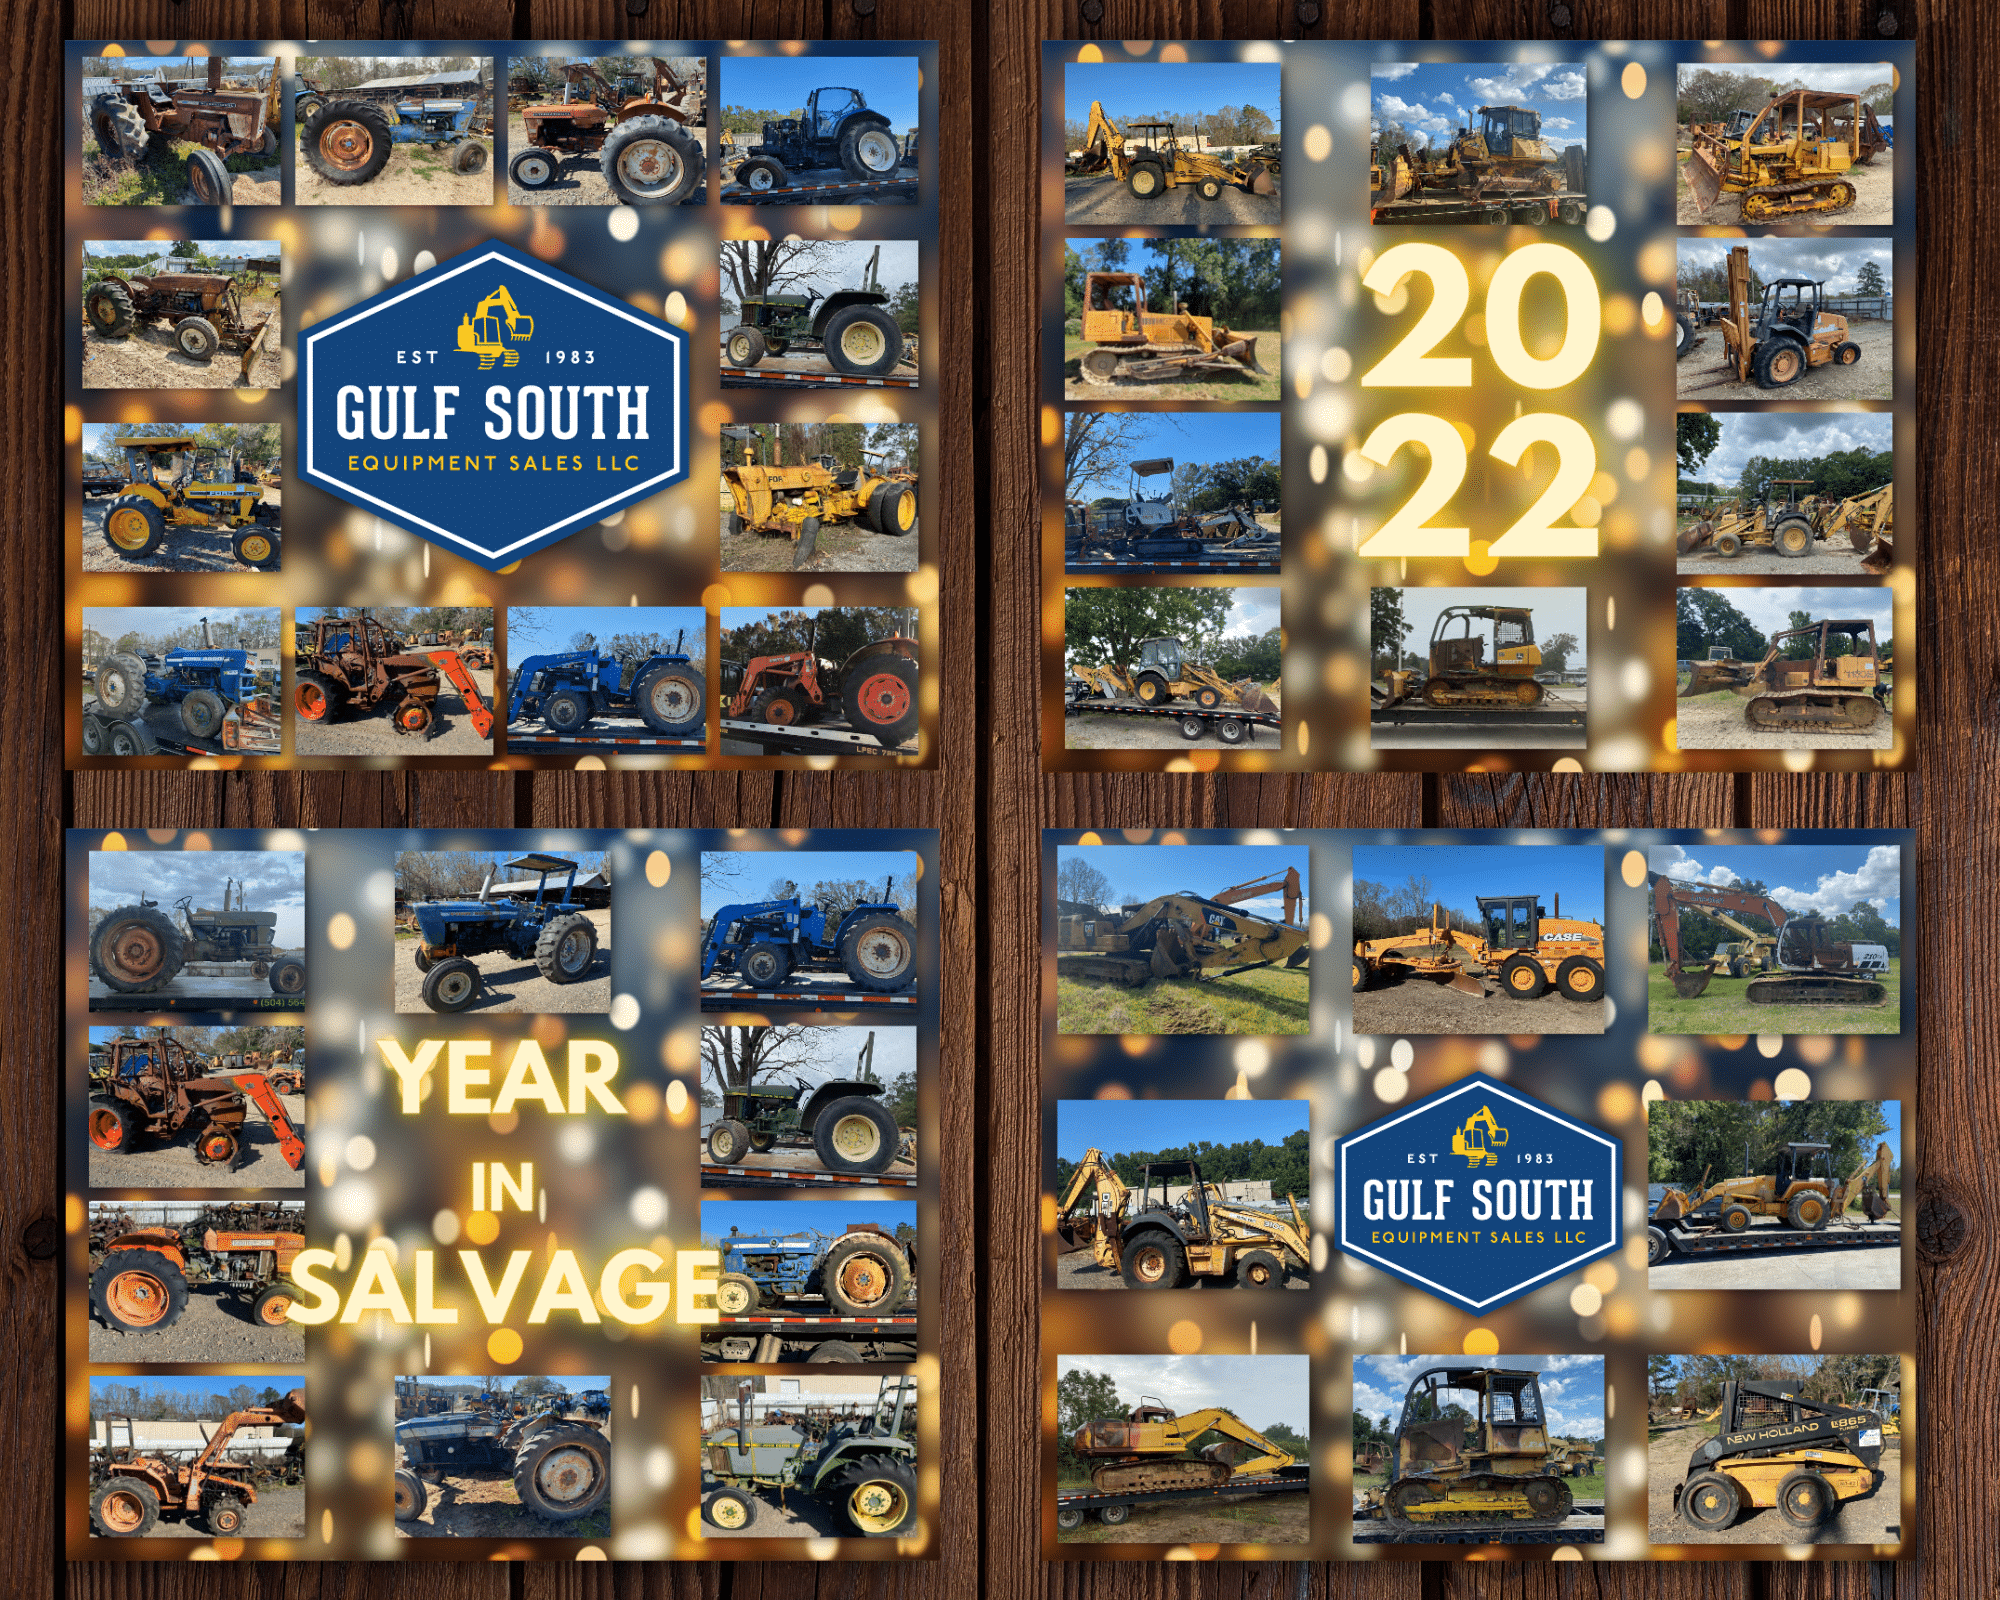 Gulf South Equipment Sales 2022 Year In Salvage